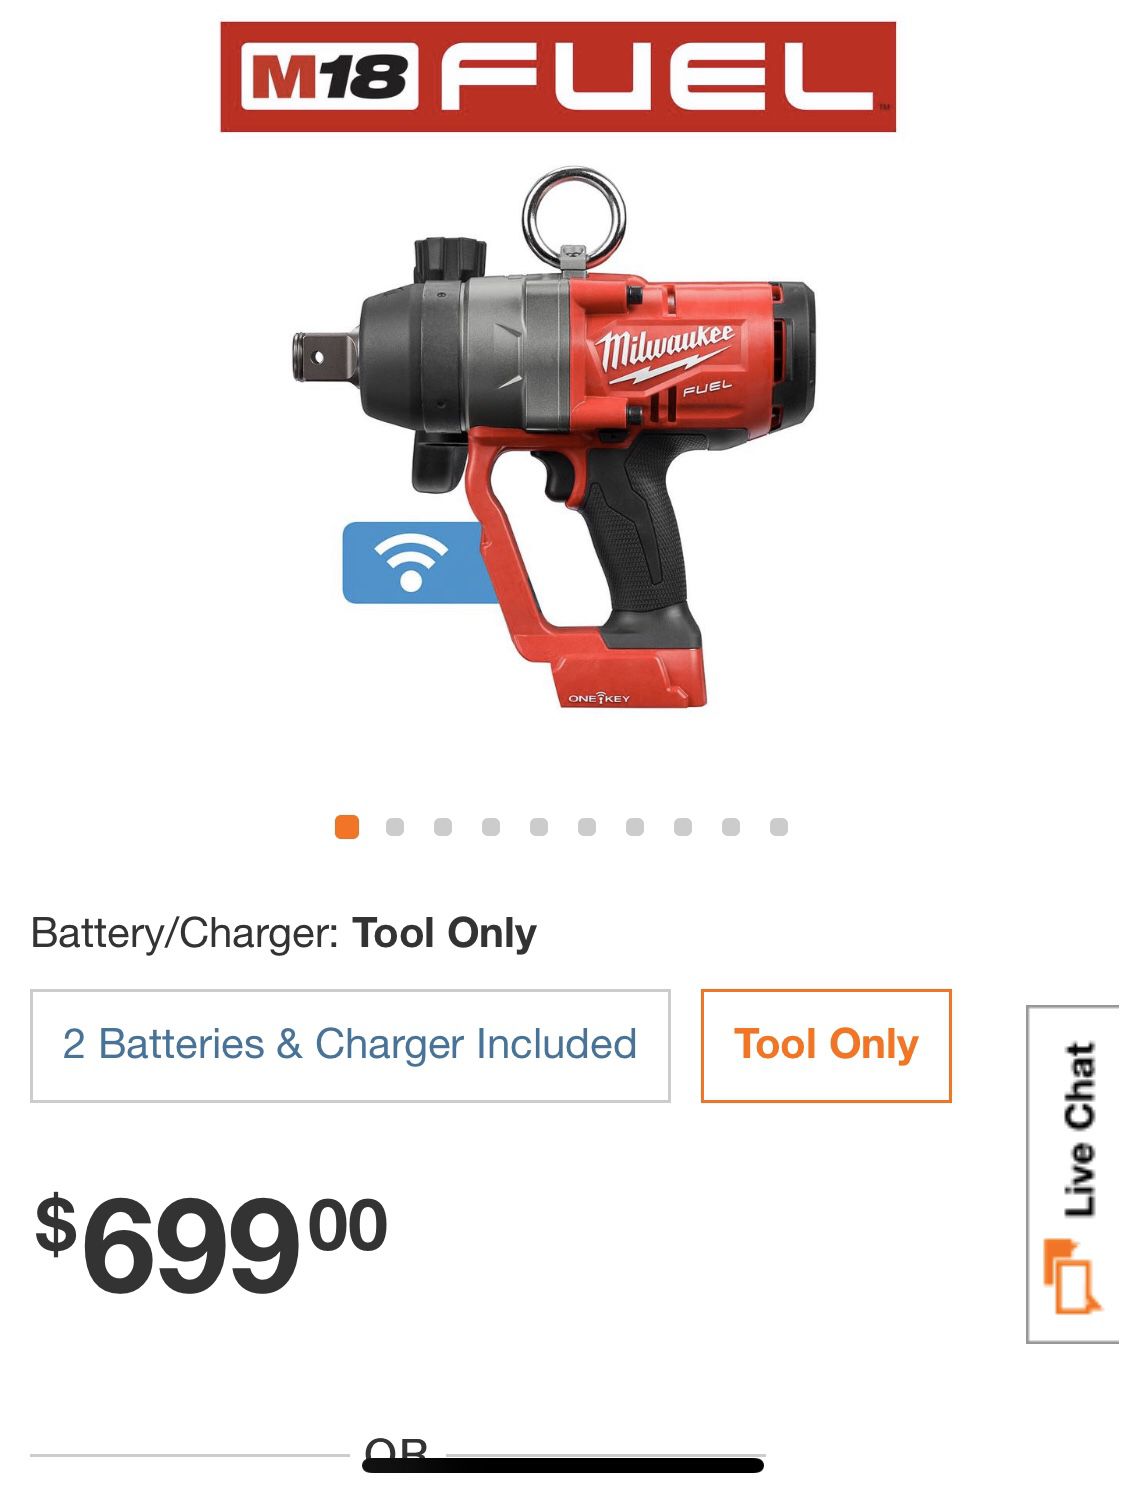 M18 ONE-KEY FUEL 18-Volt Lithium-Ion Brushless Cordless 1 in. Impact Wrench with Friction Ring M18 18-Volt Lithium-Ion HIGH OUTPUT XC 8.0Ah Battery